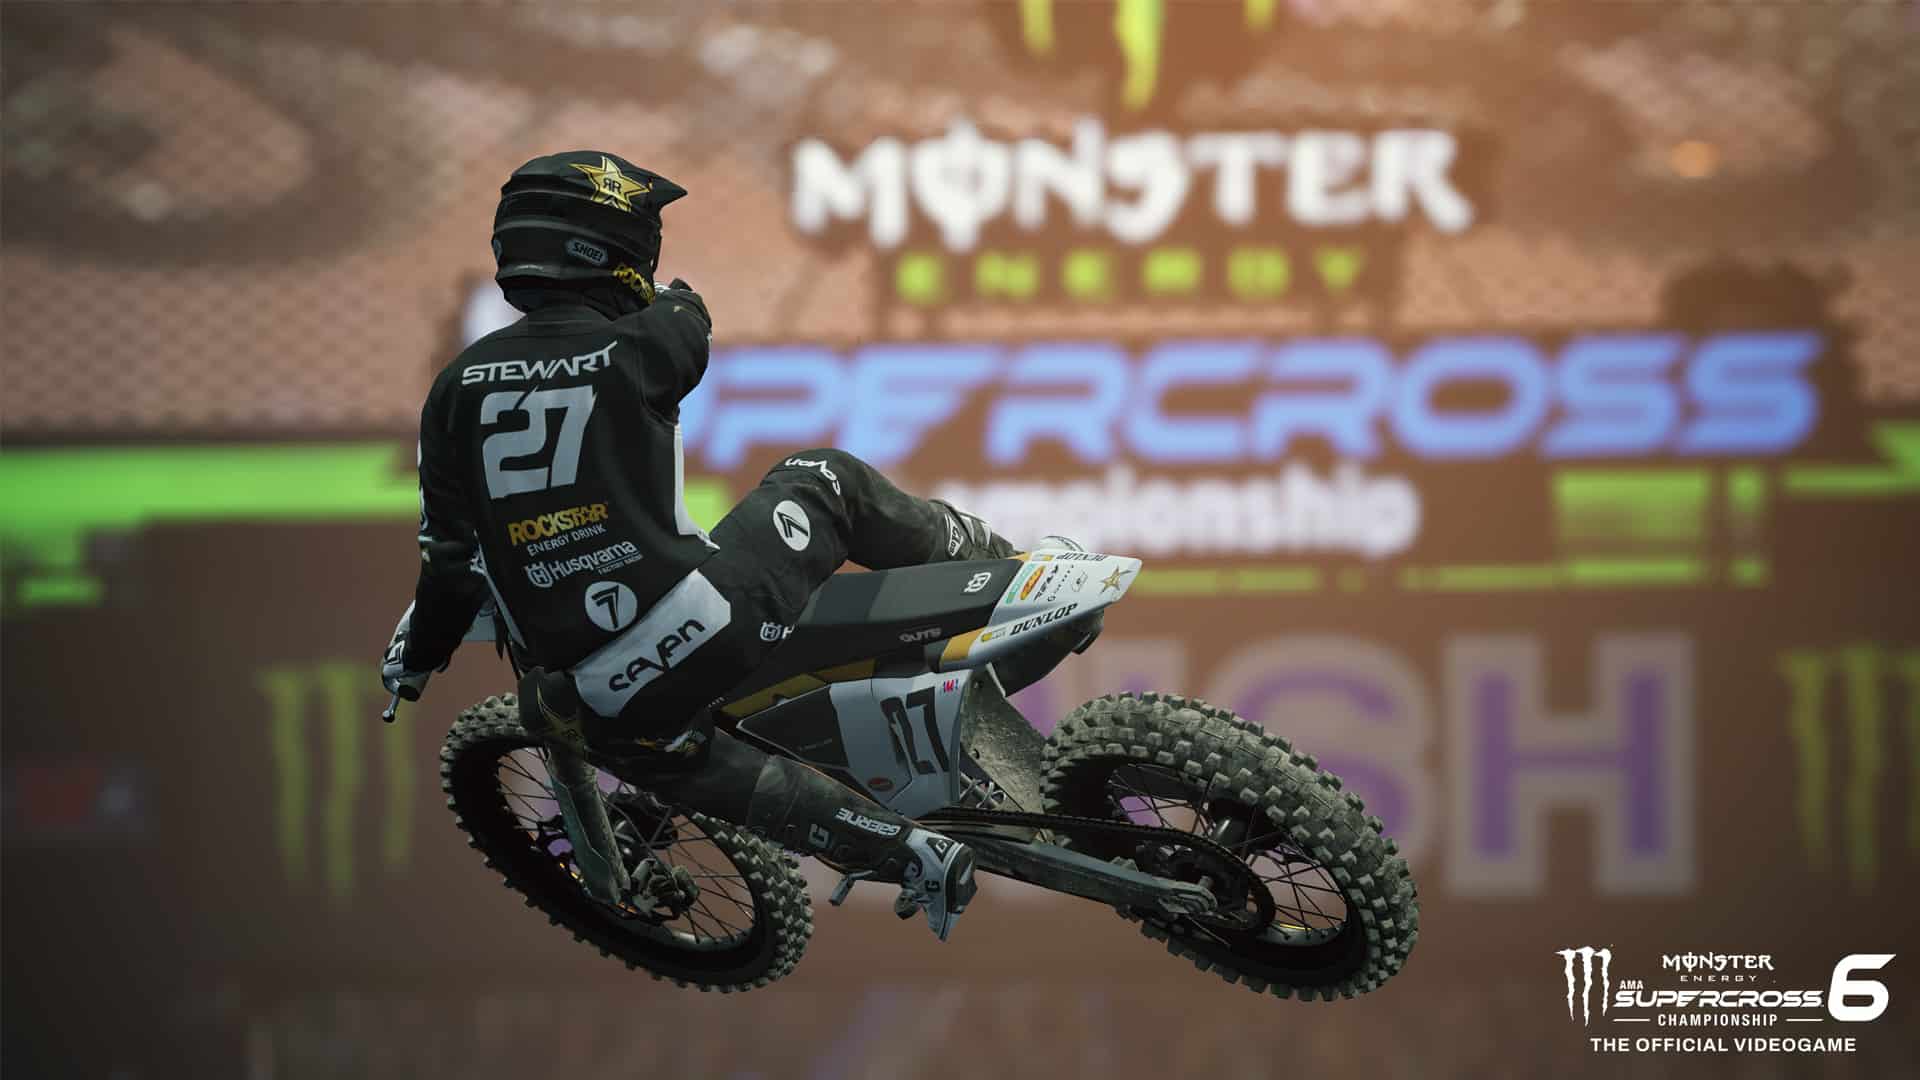 Top 7 best MOTOCROSS GAMES for PC and CONSOLES 